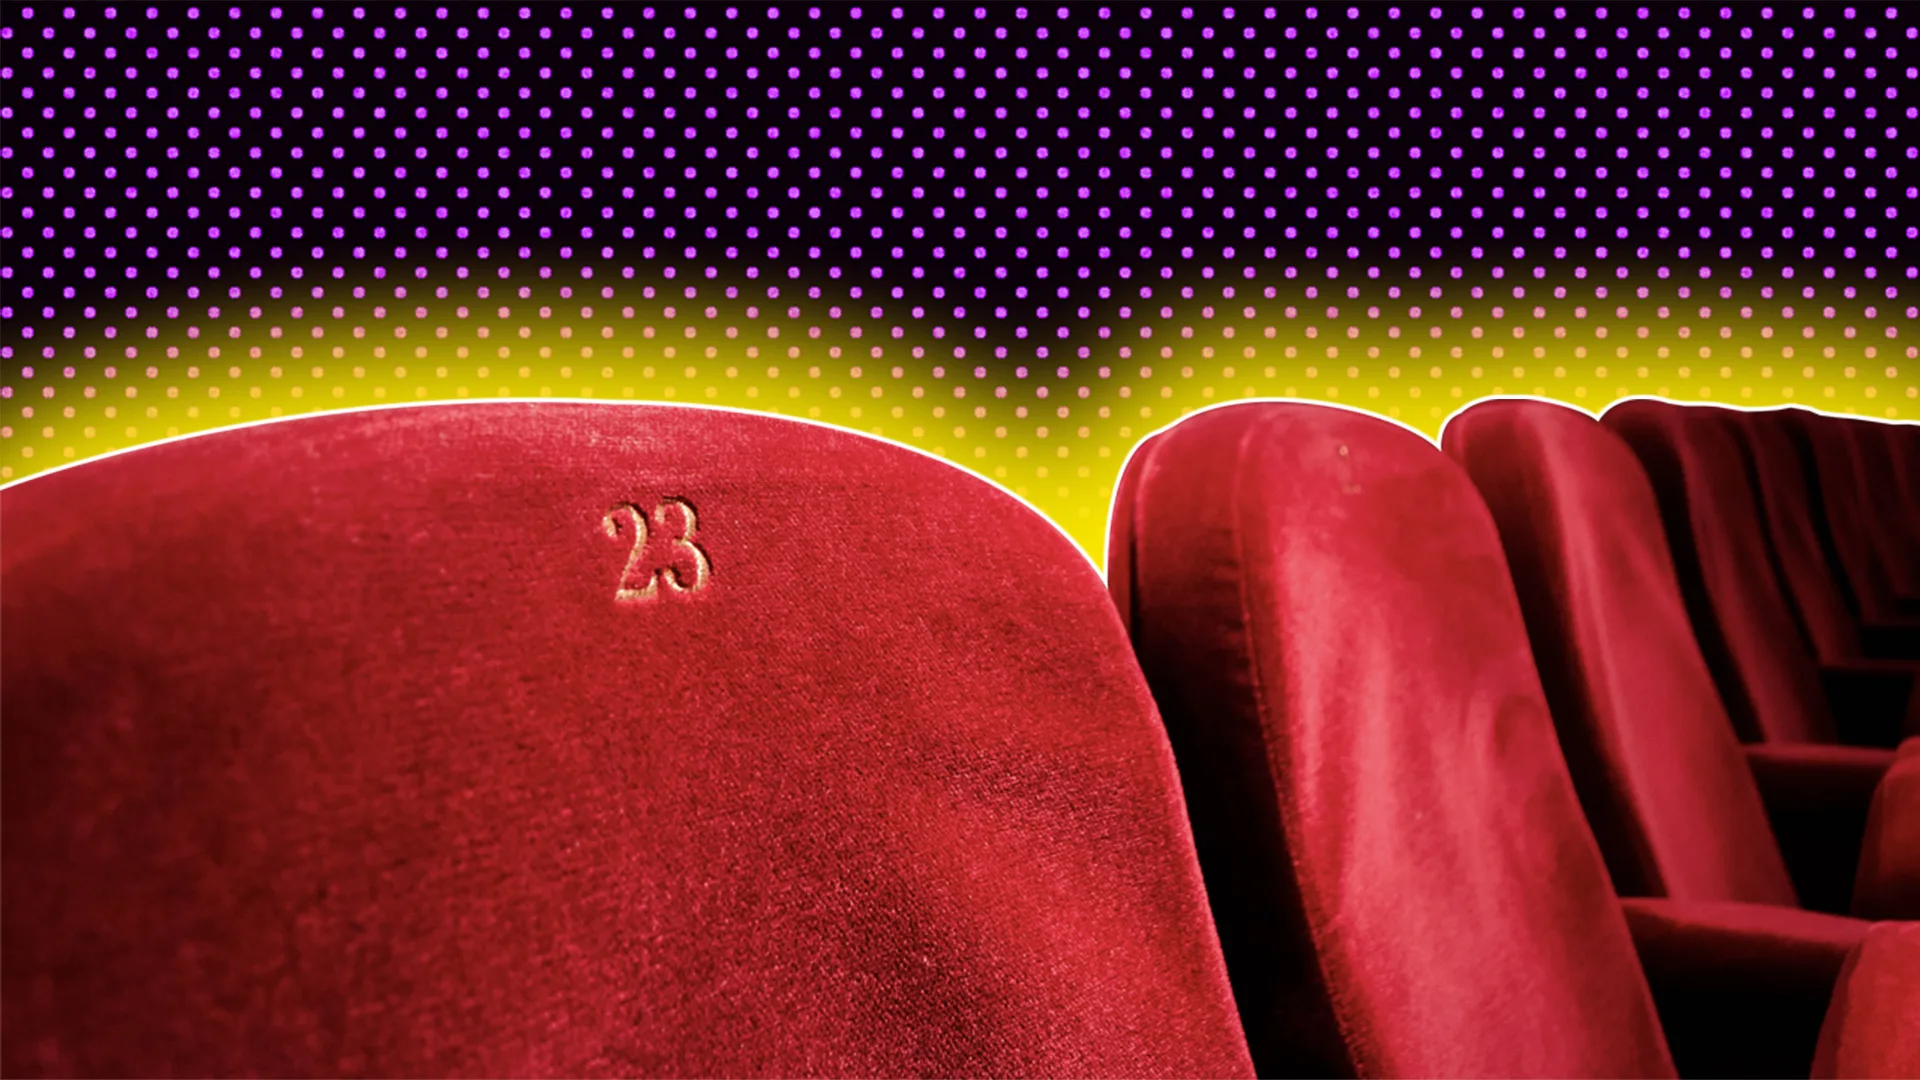 Numbered velvet theatre seats with a polkadot background and a glow around the images